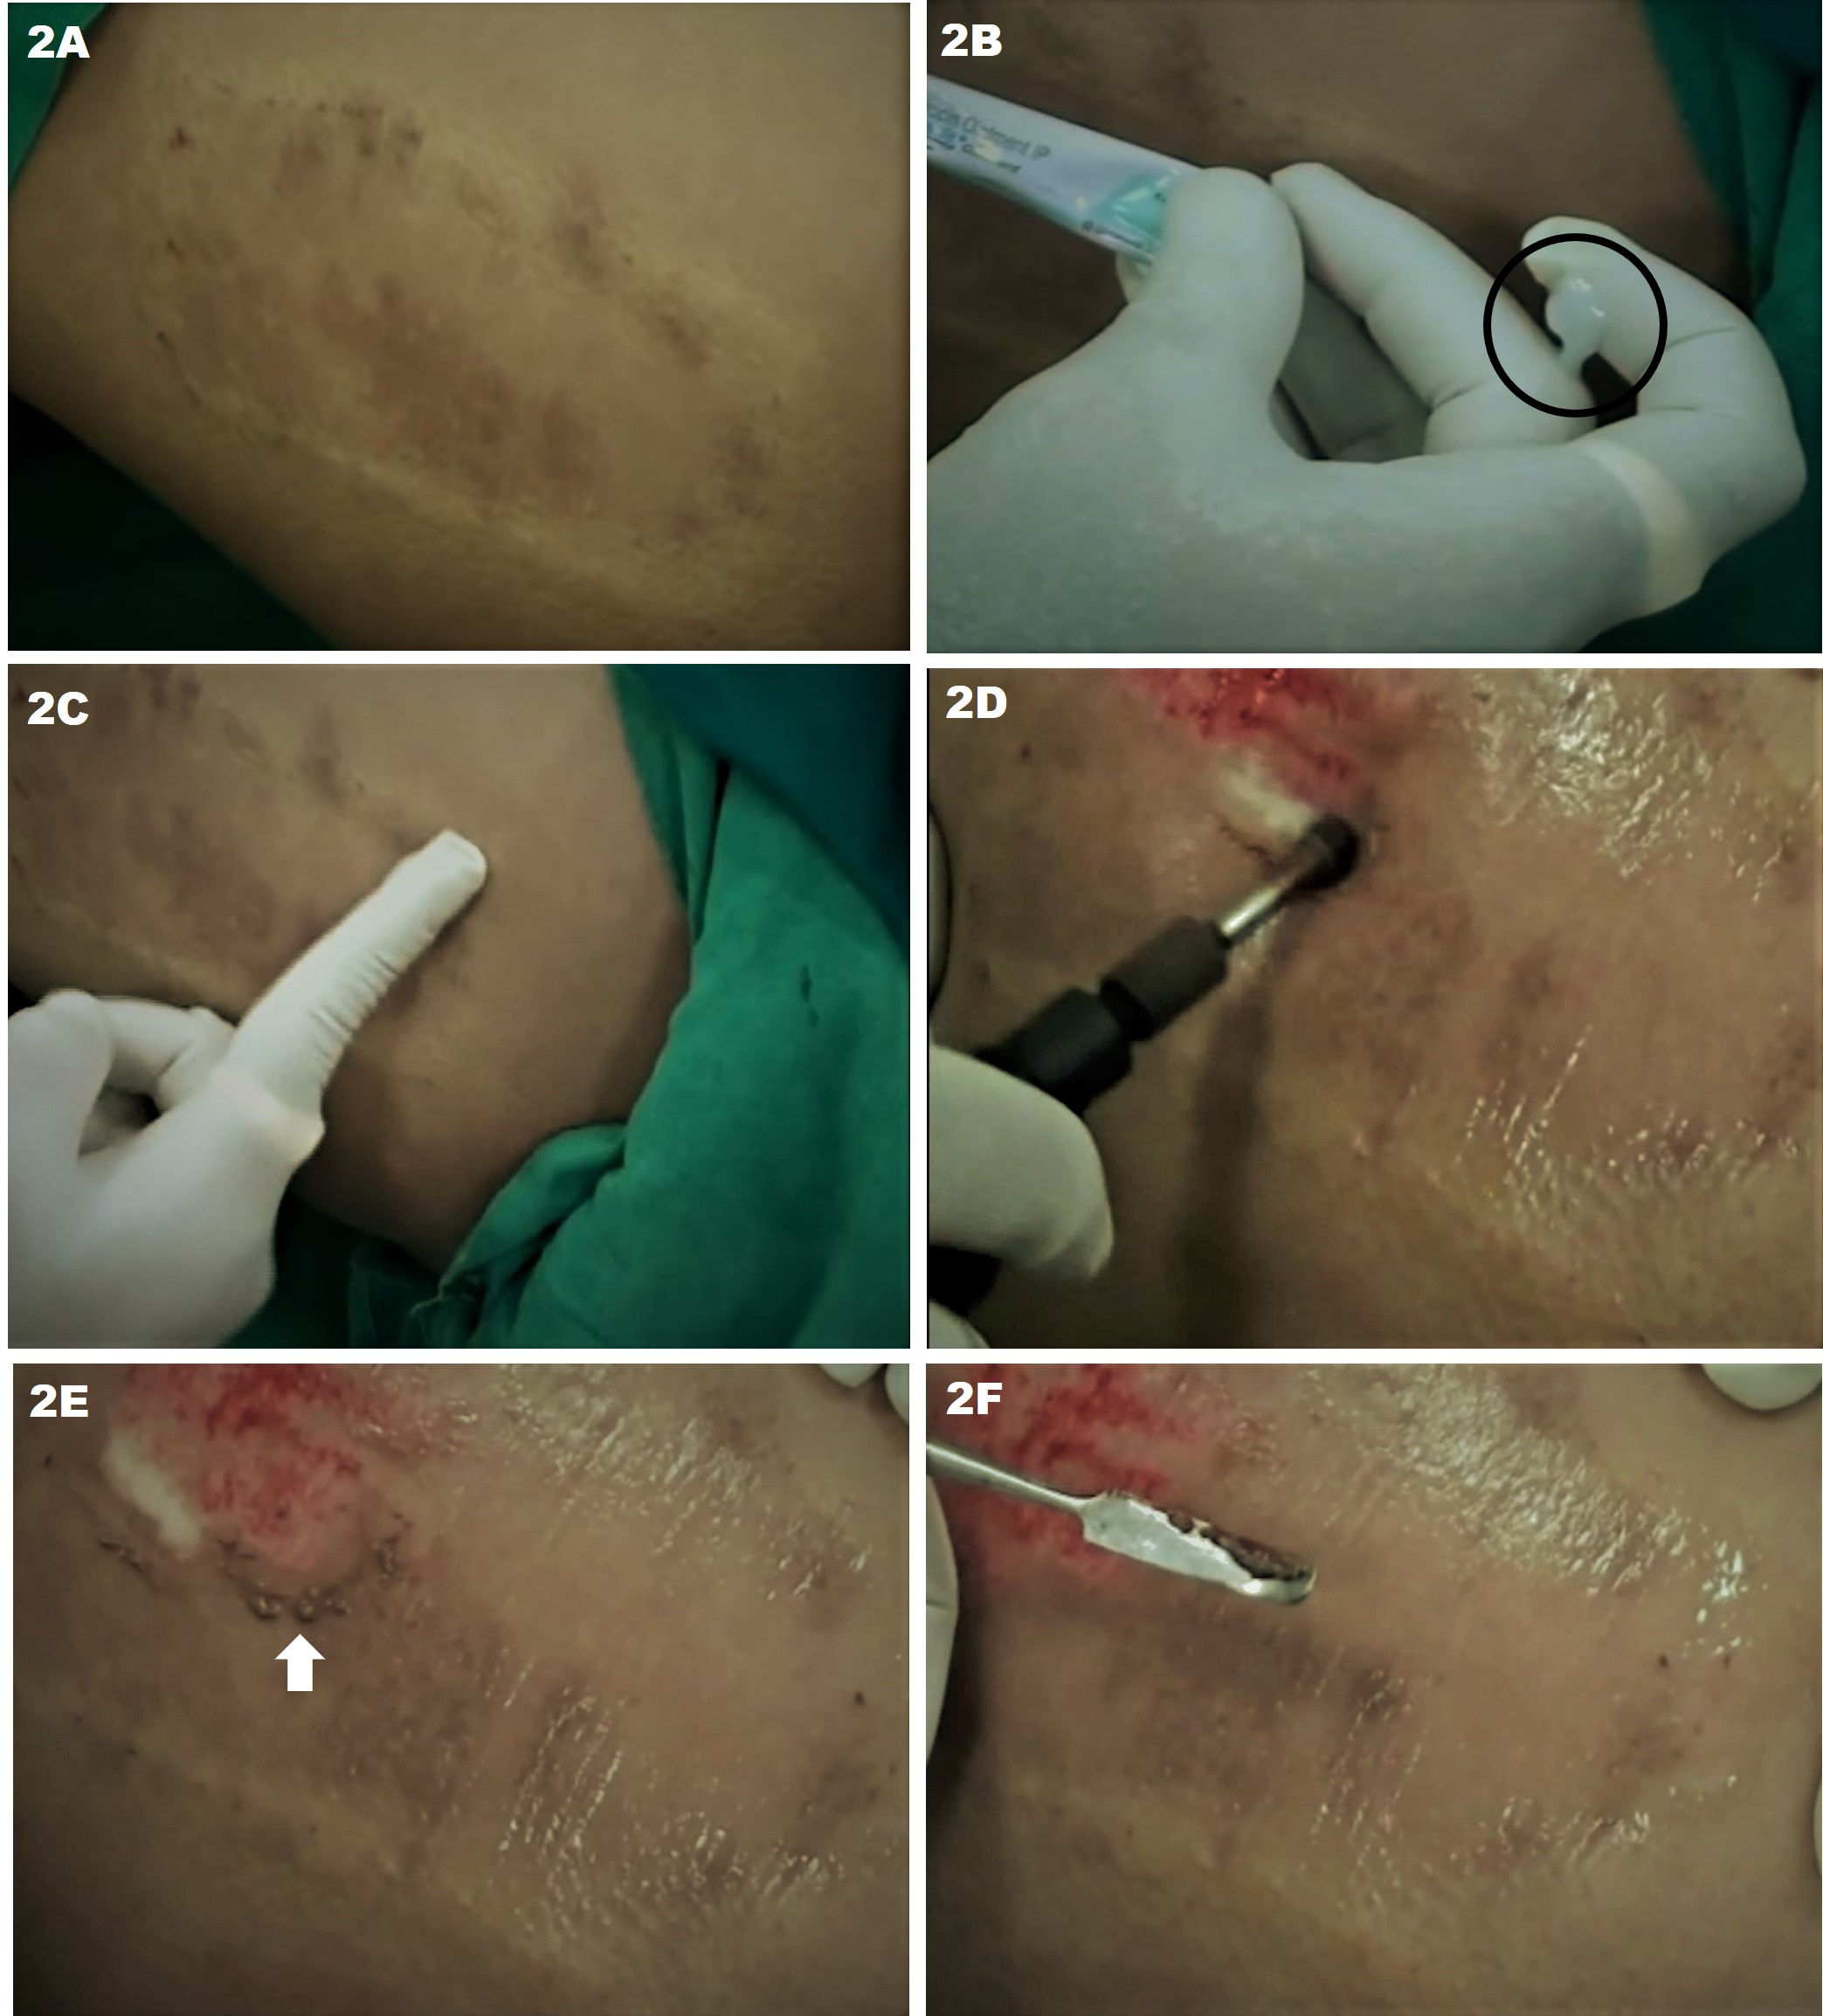 Figure 2. JODHPUR TECHNIQUE - Harvesting the graft from the donor site. (A) Baseline clinical image of the donor site, a post-STSG repigmented area with uneven texture (often encountered after STSG). This also shows the advantage of JT, in which a repigmented site can also be used as donor without the fear of depigmentation; (B) Antibiotic ointment (black circle shows the ointment blob to be smeared)  that would entrap the dermabraded particles from the donor site; (C) Pre-dermabrasion smearing of the ointment; (D) Dermabrasion of the ointment-smeared donor area to procure the graft; (E) The graft material visible as clumped particles along the periphery of the dermabraded donor area (white arrow); (F) Graft material collected using a spatula.